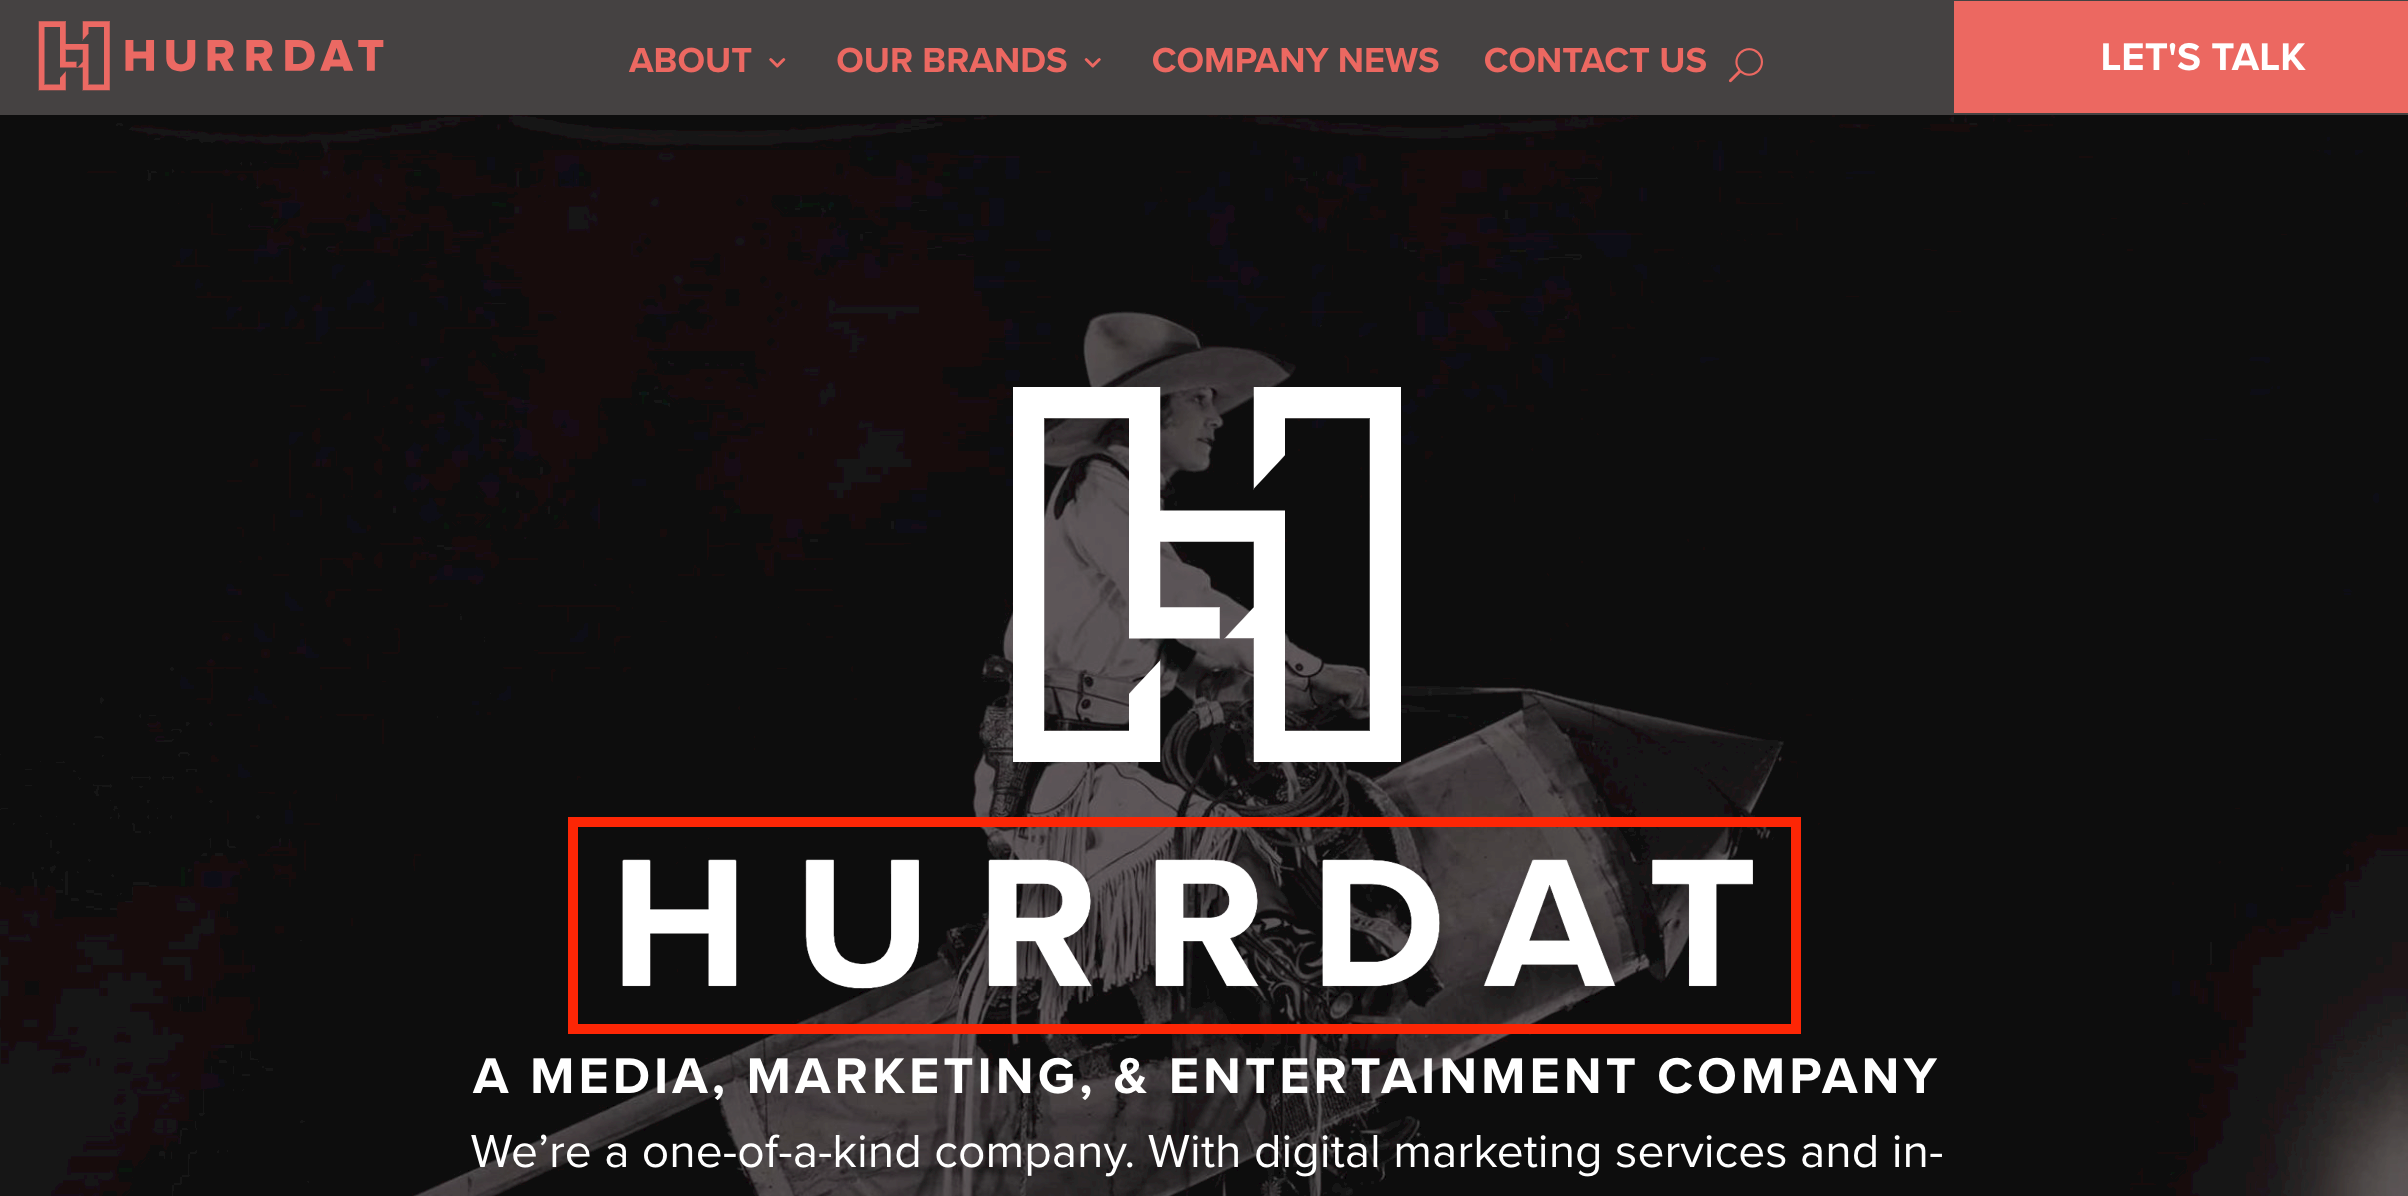 The main page of the Hurrdat website with the h1 page title "Hurrdat" highlighted.